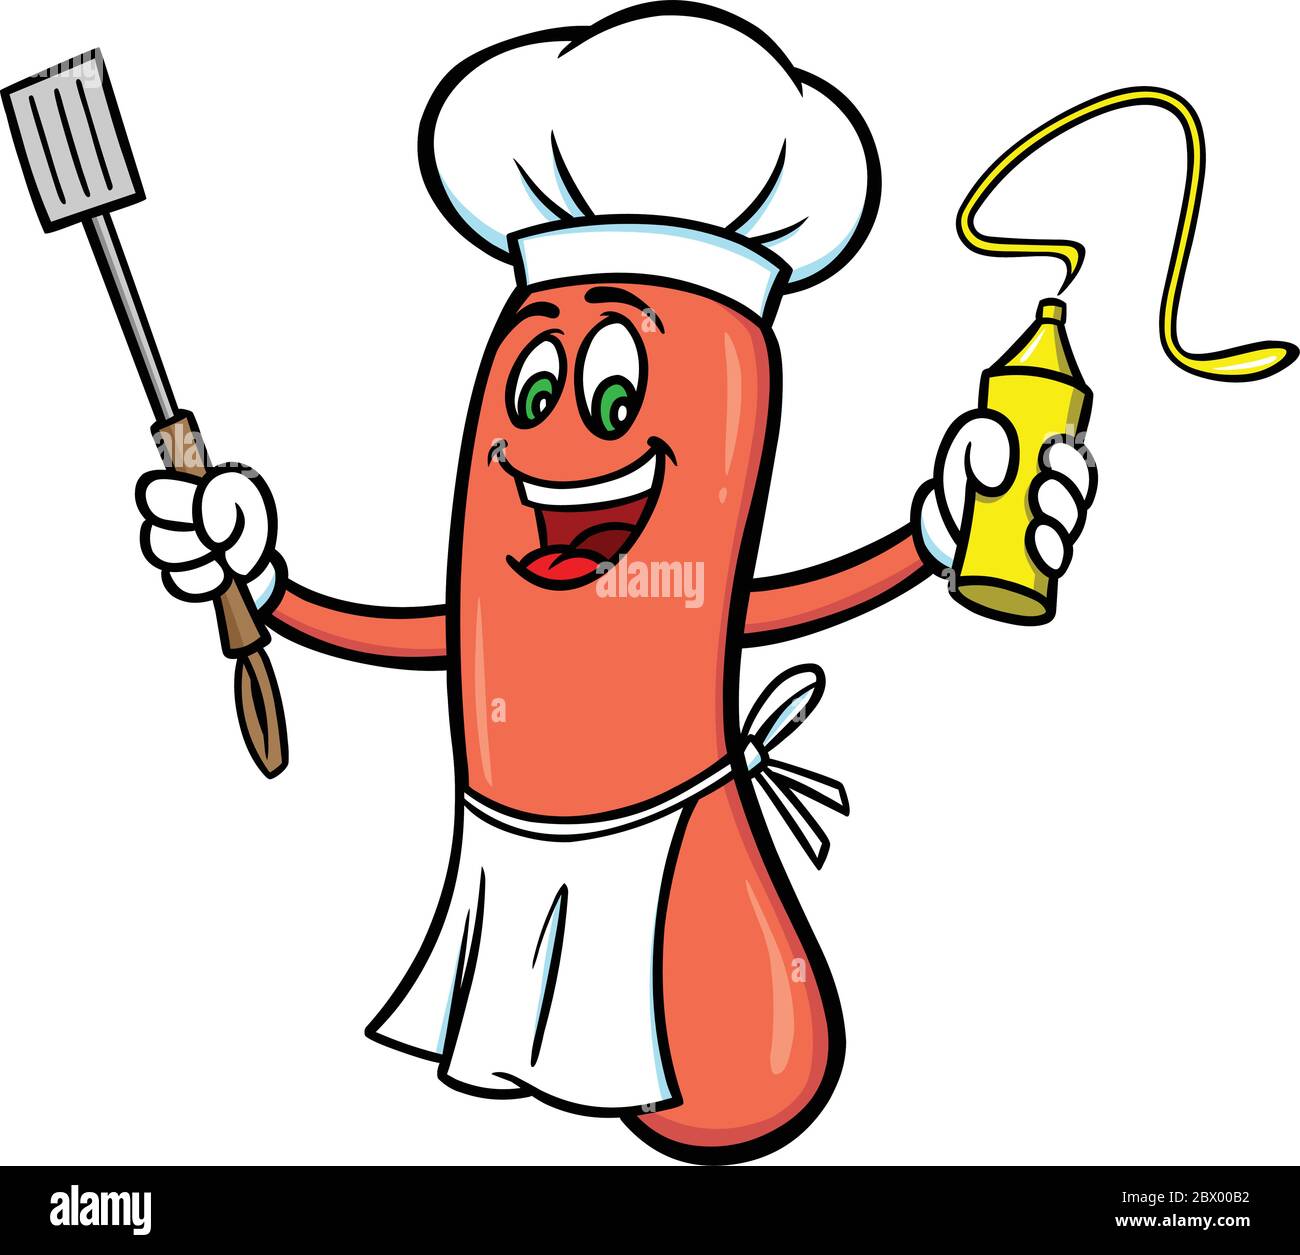 Hot Dog Cookout - A cartoon illustration of a Hot Dog Cookout. Stock Vector